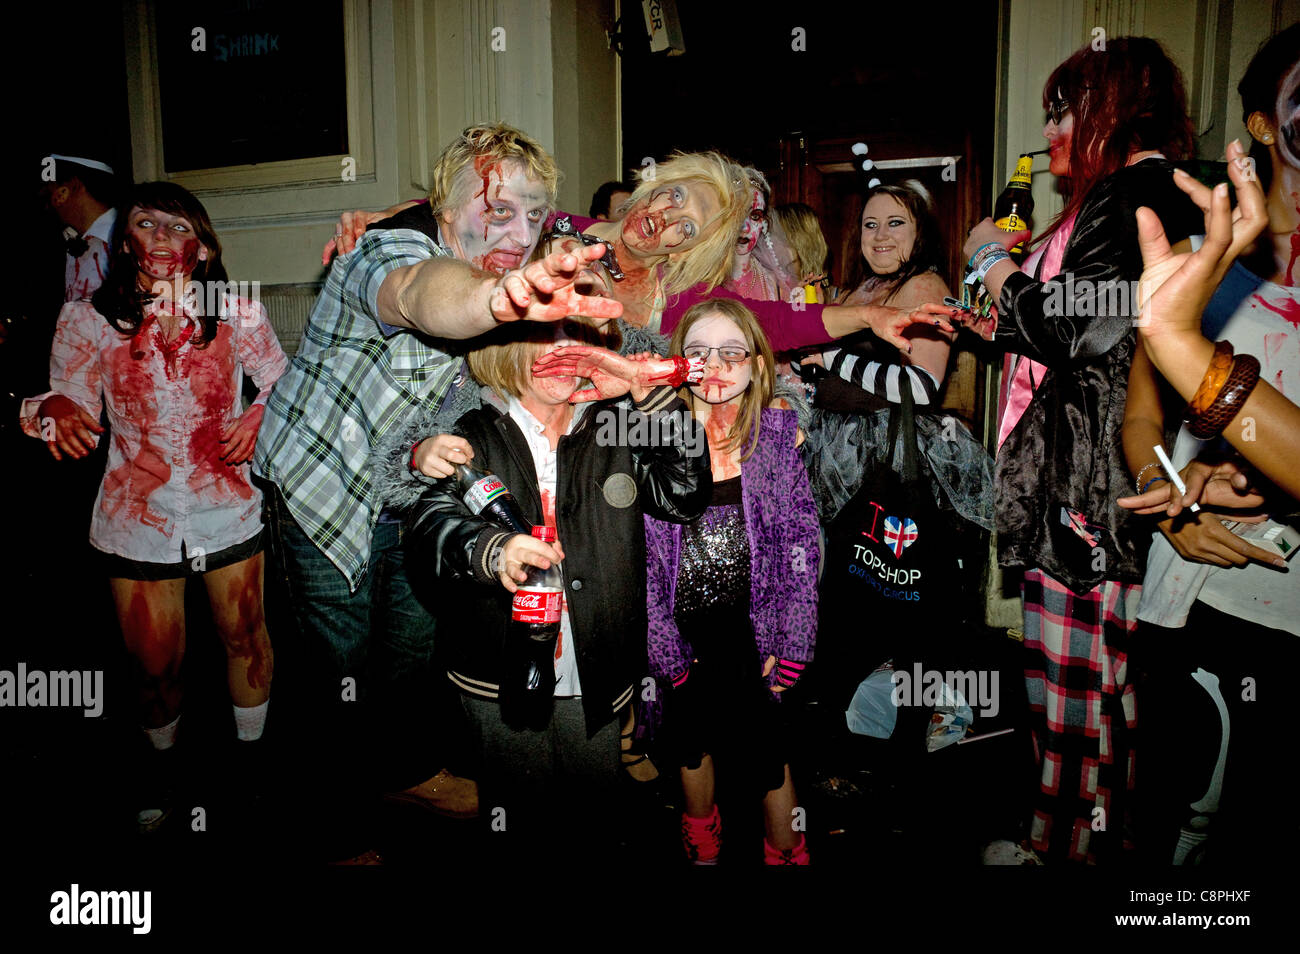 A family of Zombies posing outside a pub during a Zombie Walk and pub crawl for Halloween Piccadilly Circus London 2011. Stock Photo